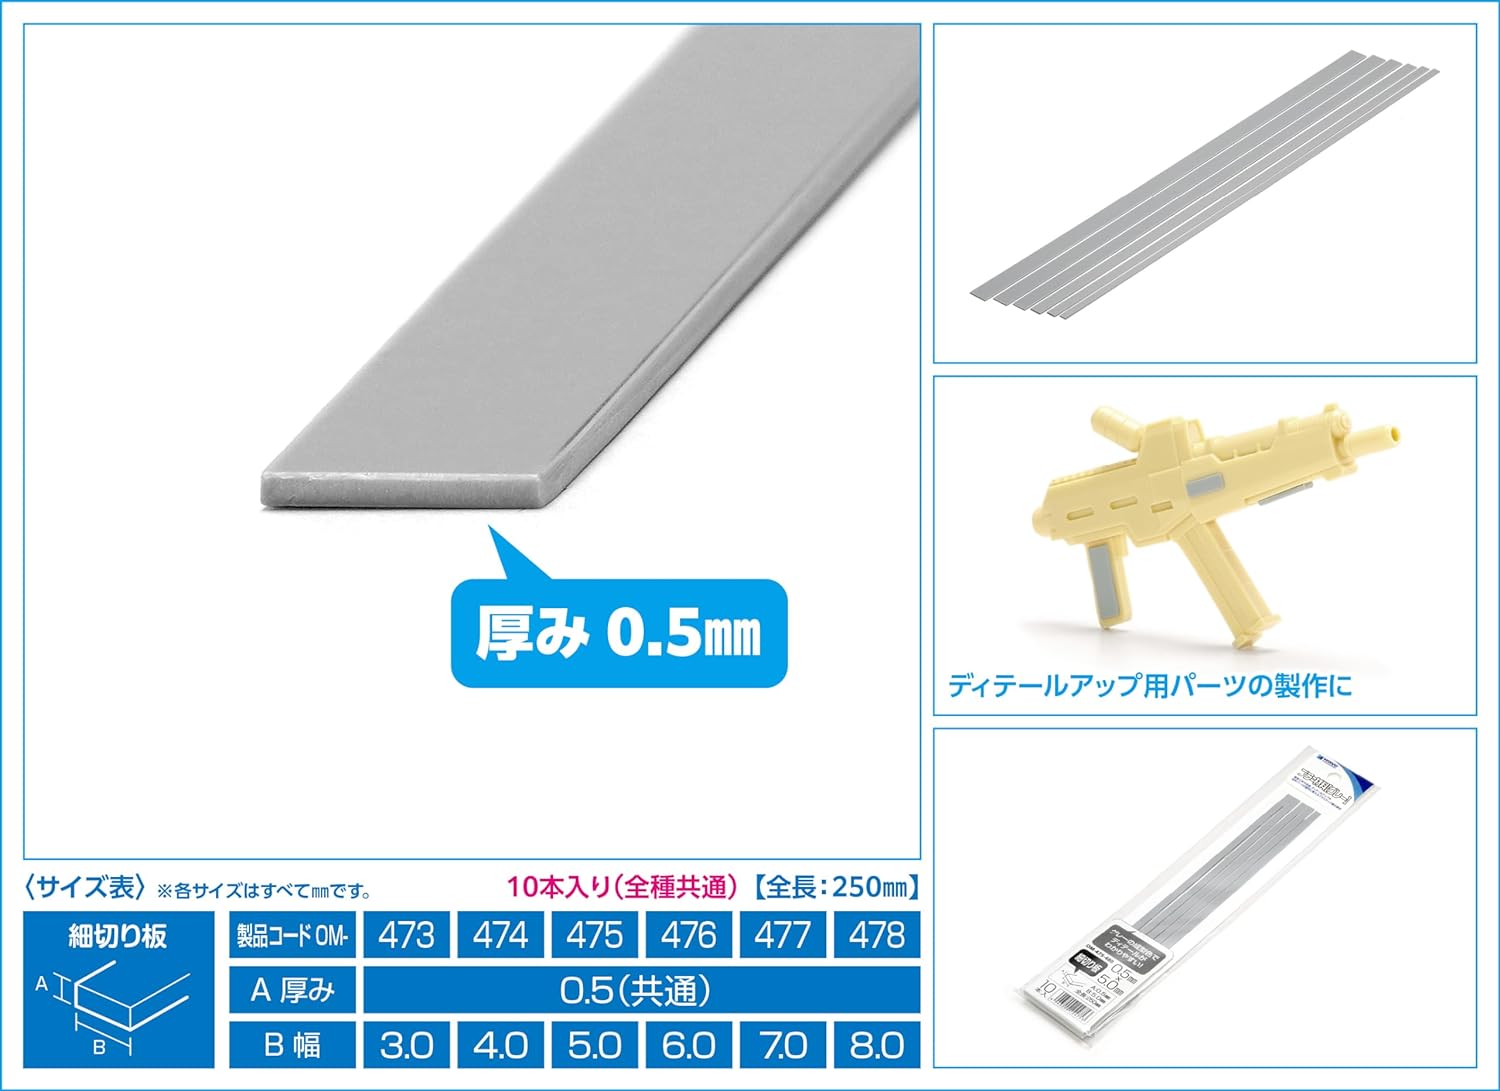 Wave Material Series OM-475 Plastic Material, Gray, Shredded Board, 0.02 x 0.2 inches (0.5 x 5.0 mm), 10 Pieces - BanzaiHobby